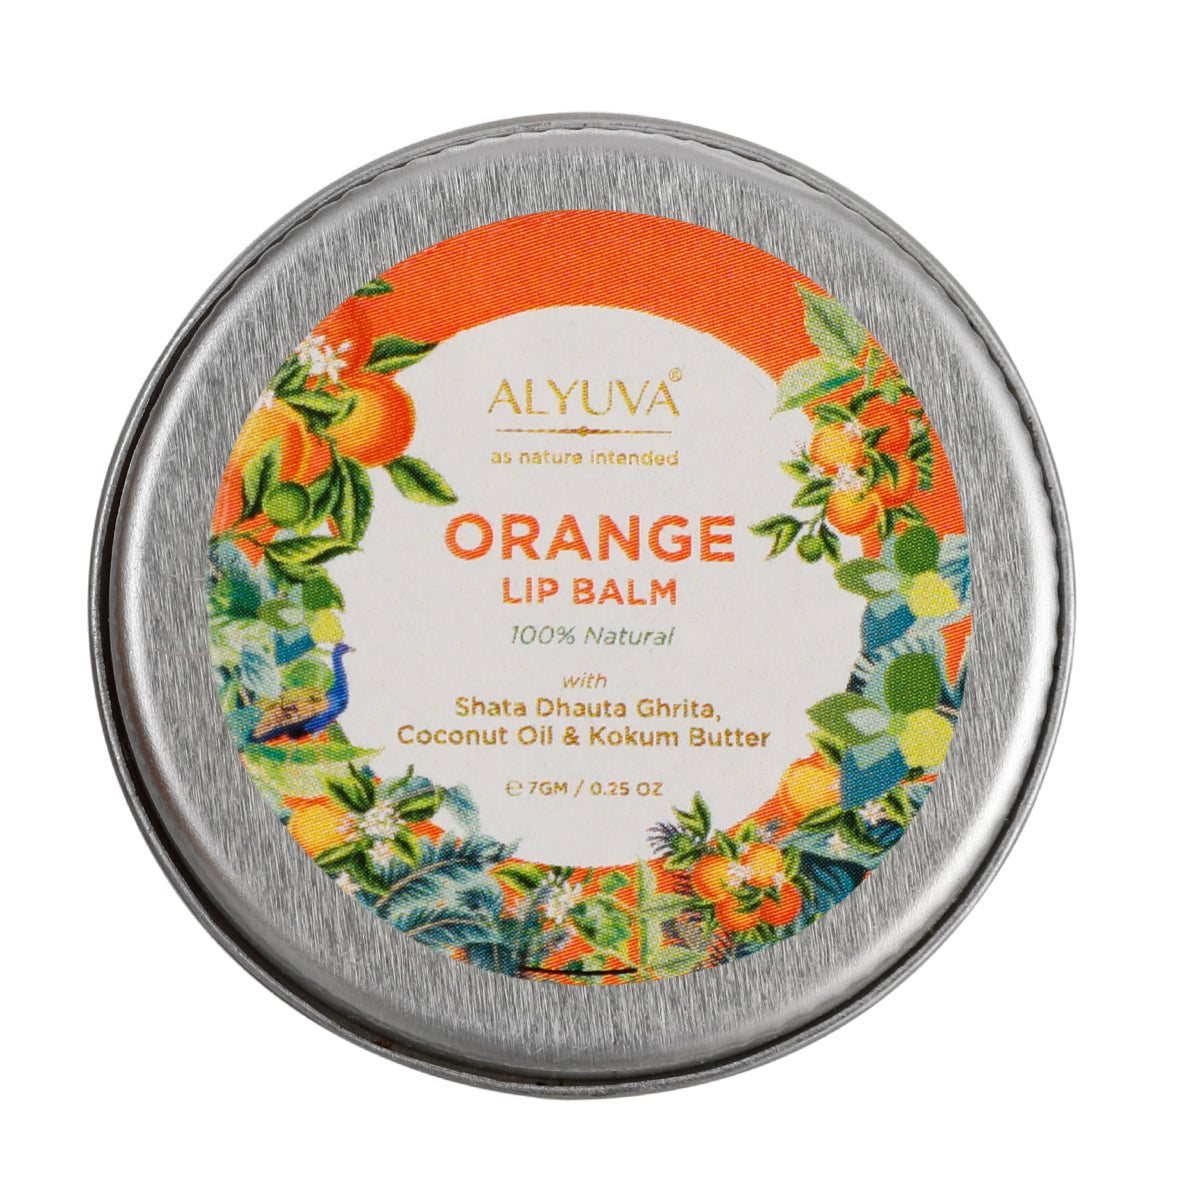 Orange Lip Balm, Natural & Herbal Ingredients, Ghee based, Unisex for all ages, 7gm, PACK OF 2